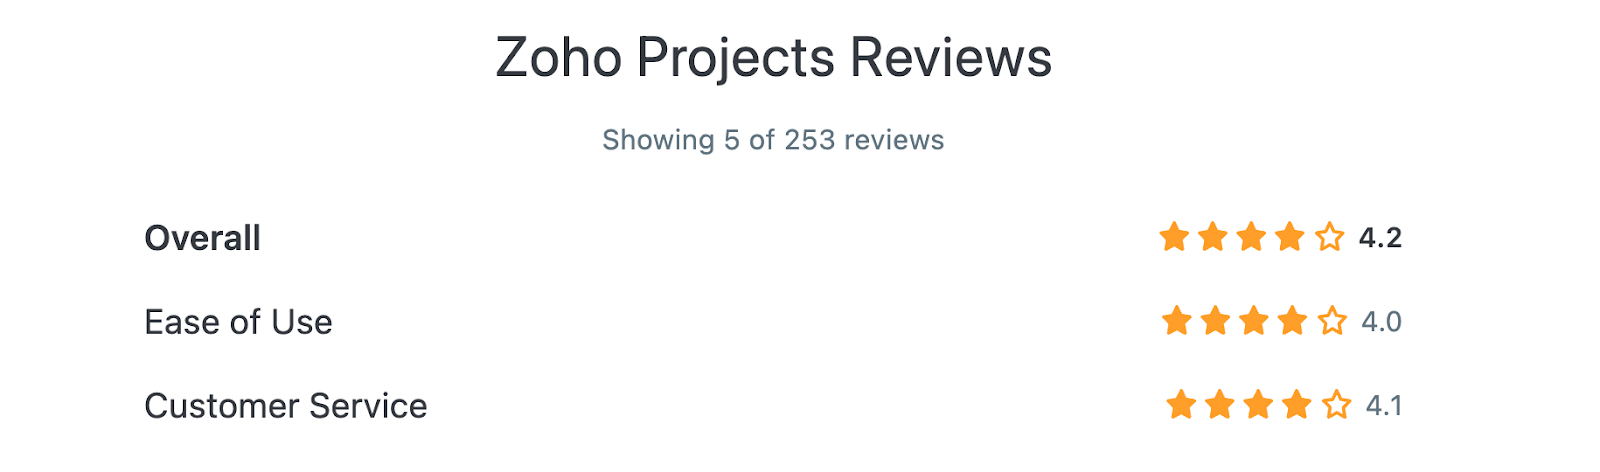 Zoho Projects reviews on Capterra (Overall: 4.2, Ease of Use: 4.0, Customer Service: 4.1)